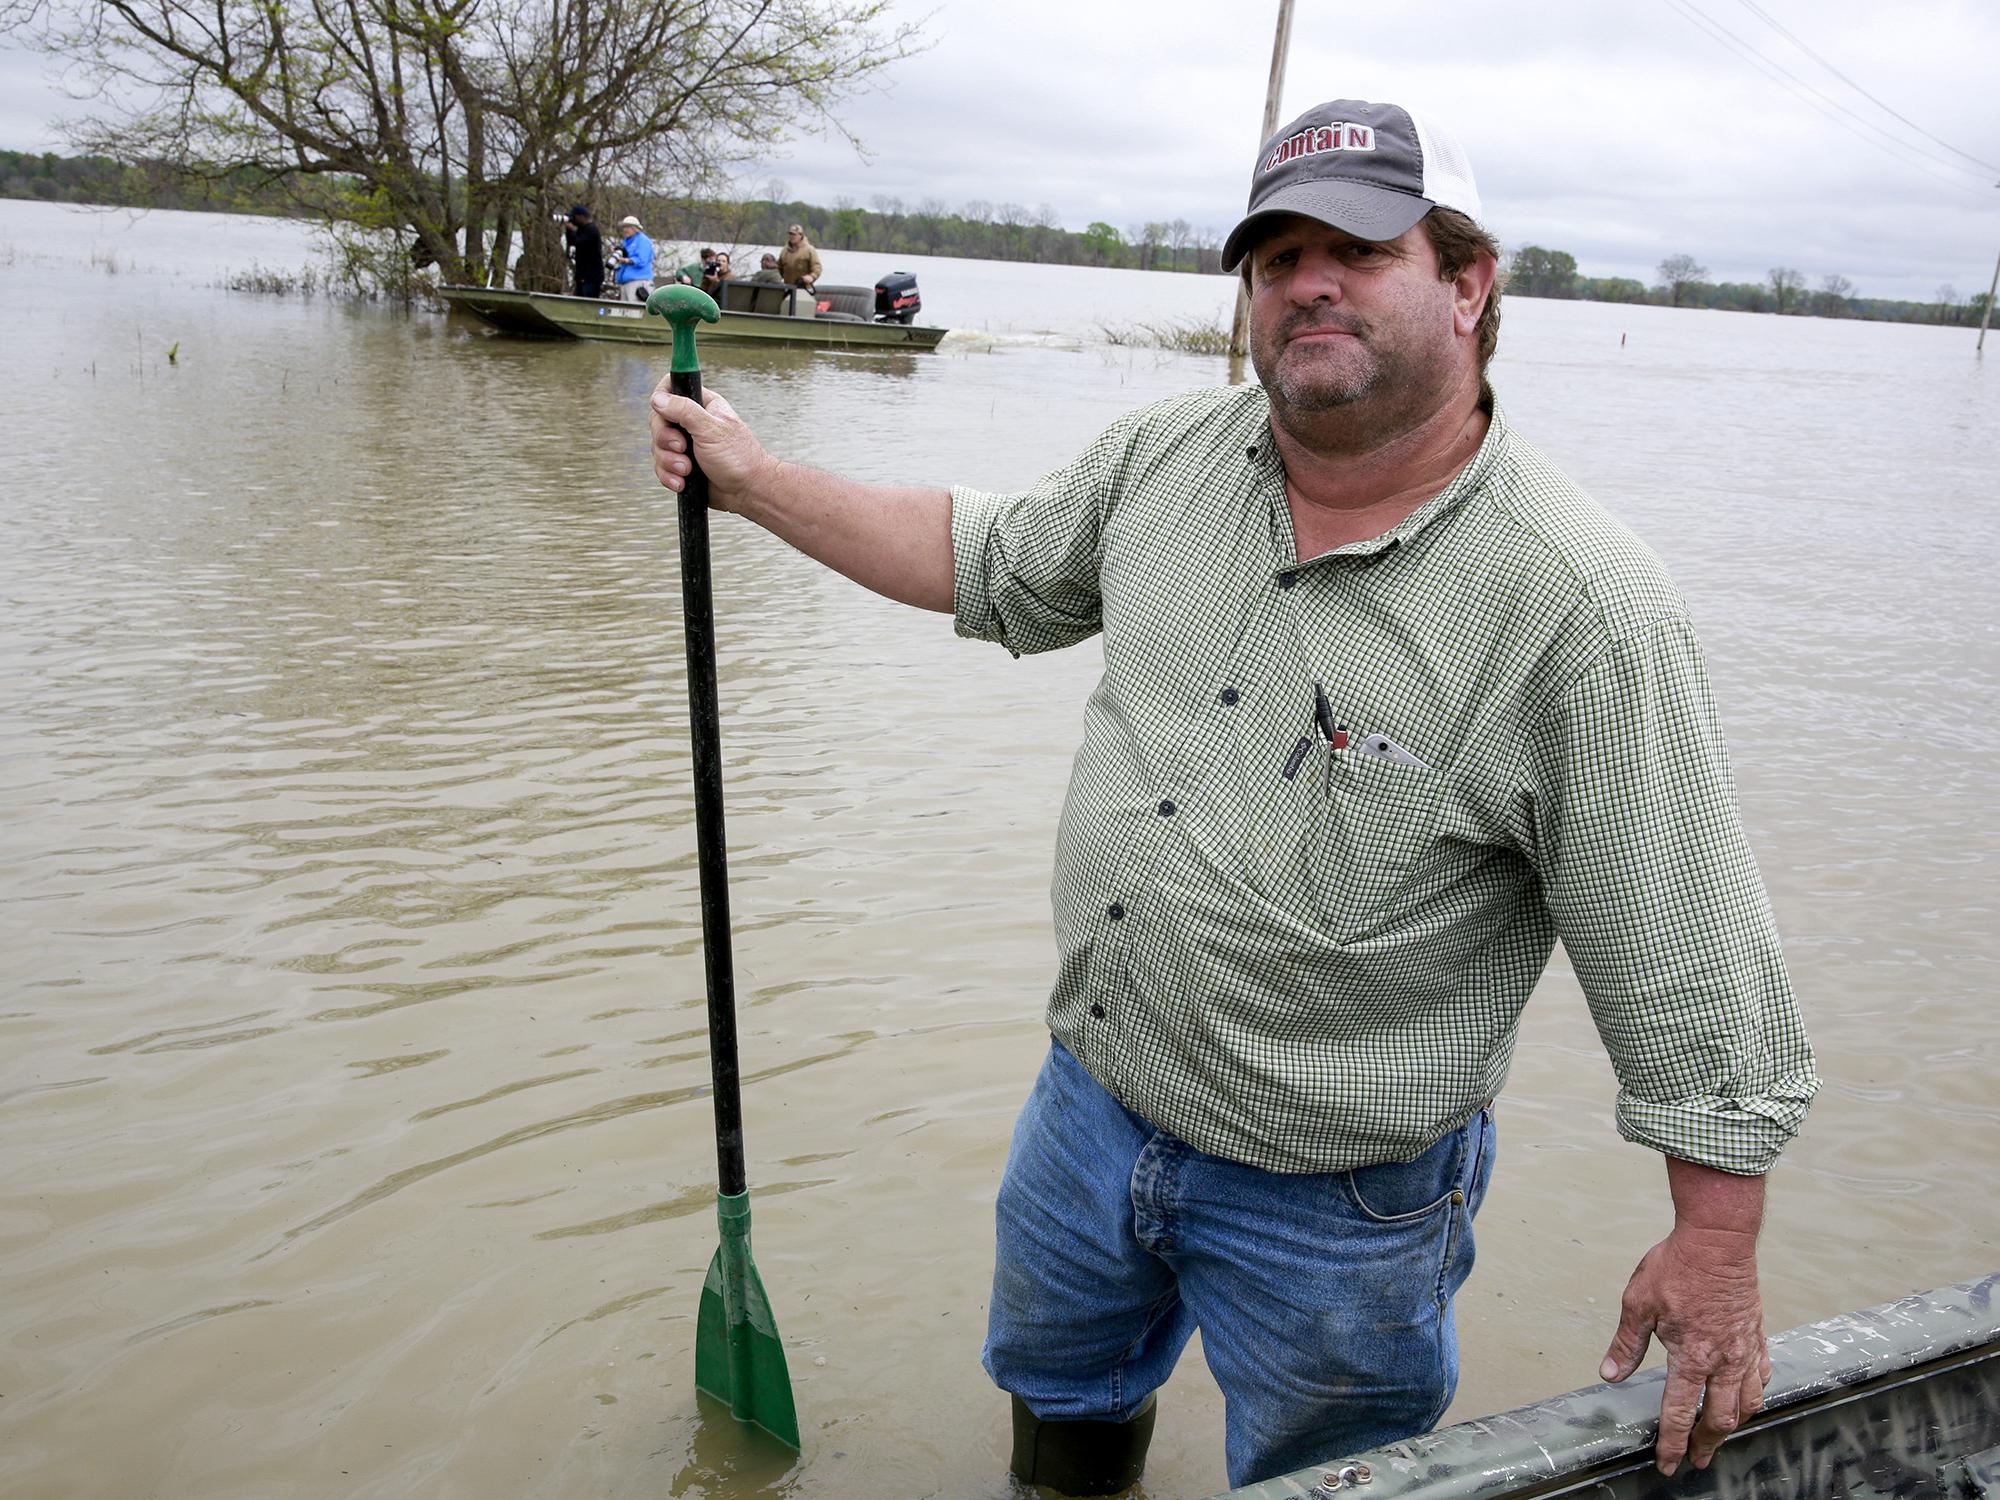 A man in work clothes, baseball cap and wading boots stands in water outside his boat holding a paddle.